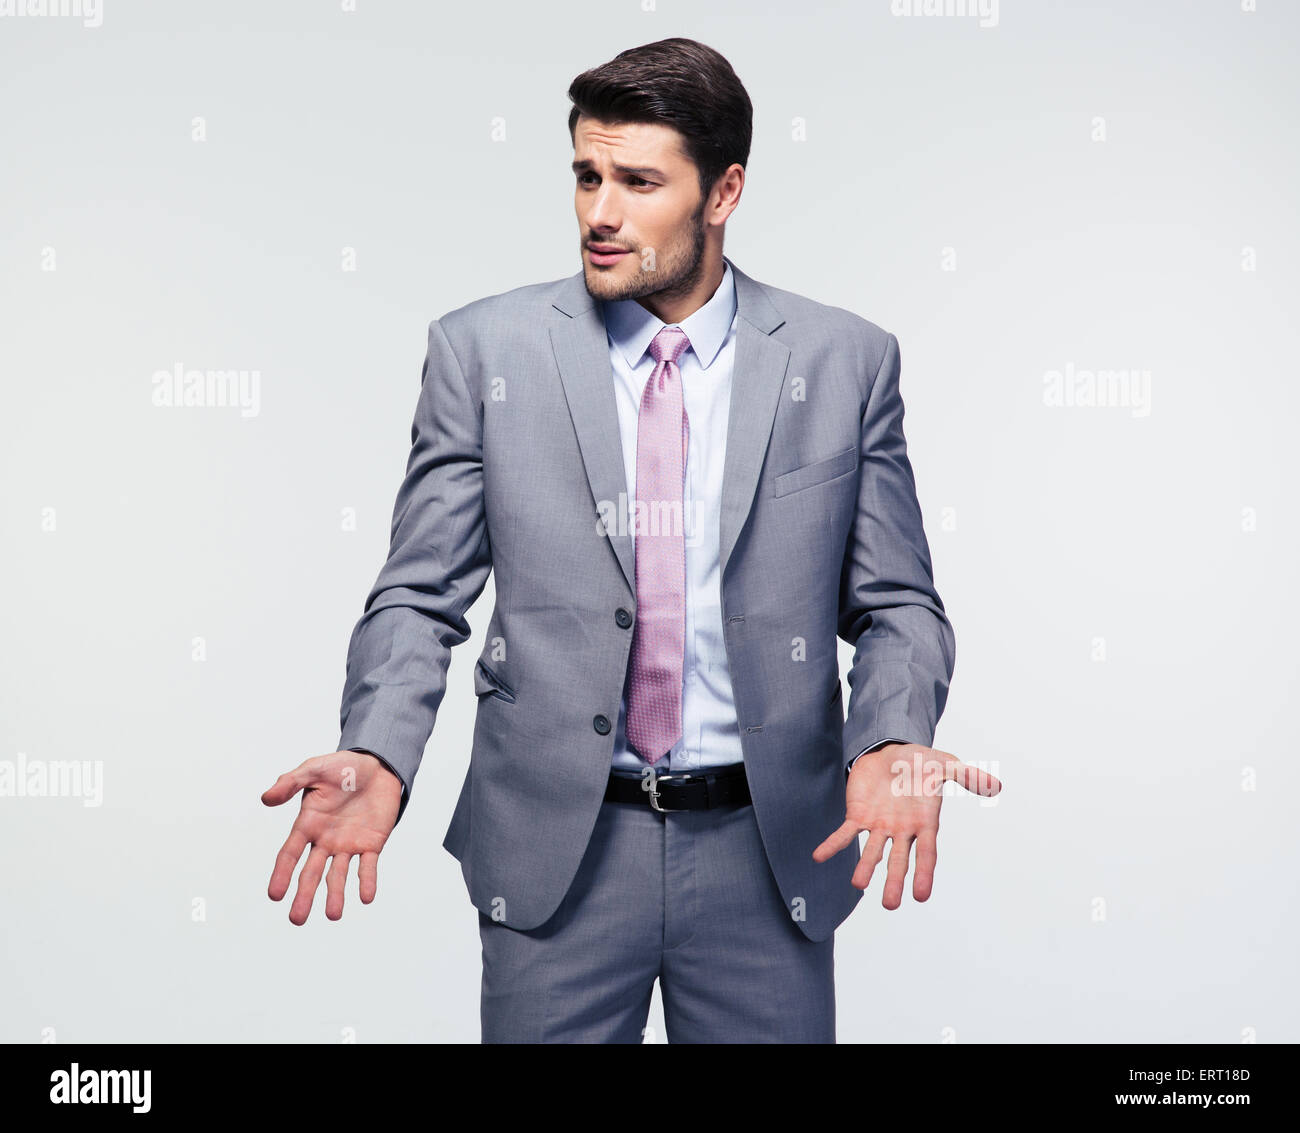 Businessman shrugging shoulders over gray background. Looking at camera Stock Photo